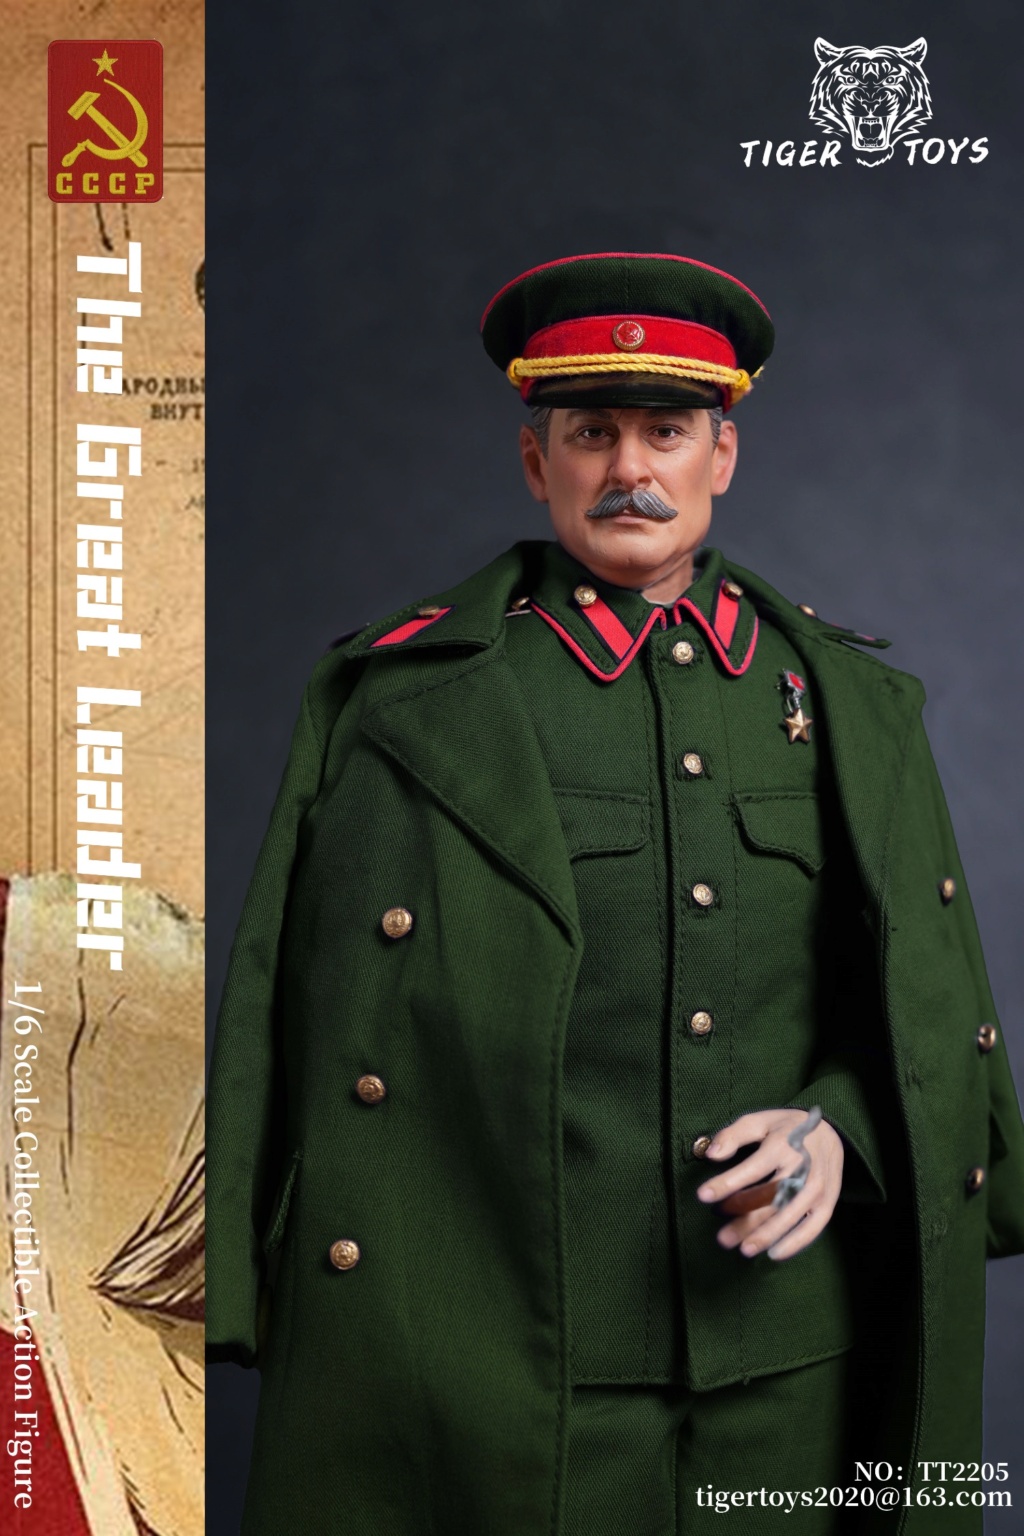 Tigertoys - NEW PRODUCT: Tigertoys: 1 / 6 scale Soviet leader Stalin 13565910